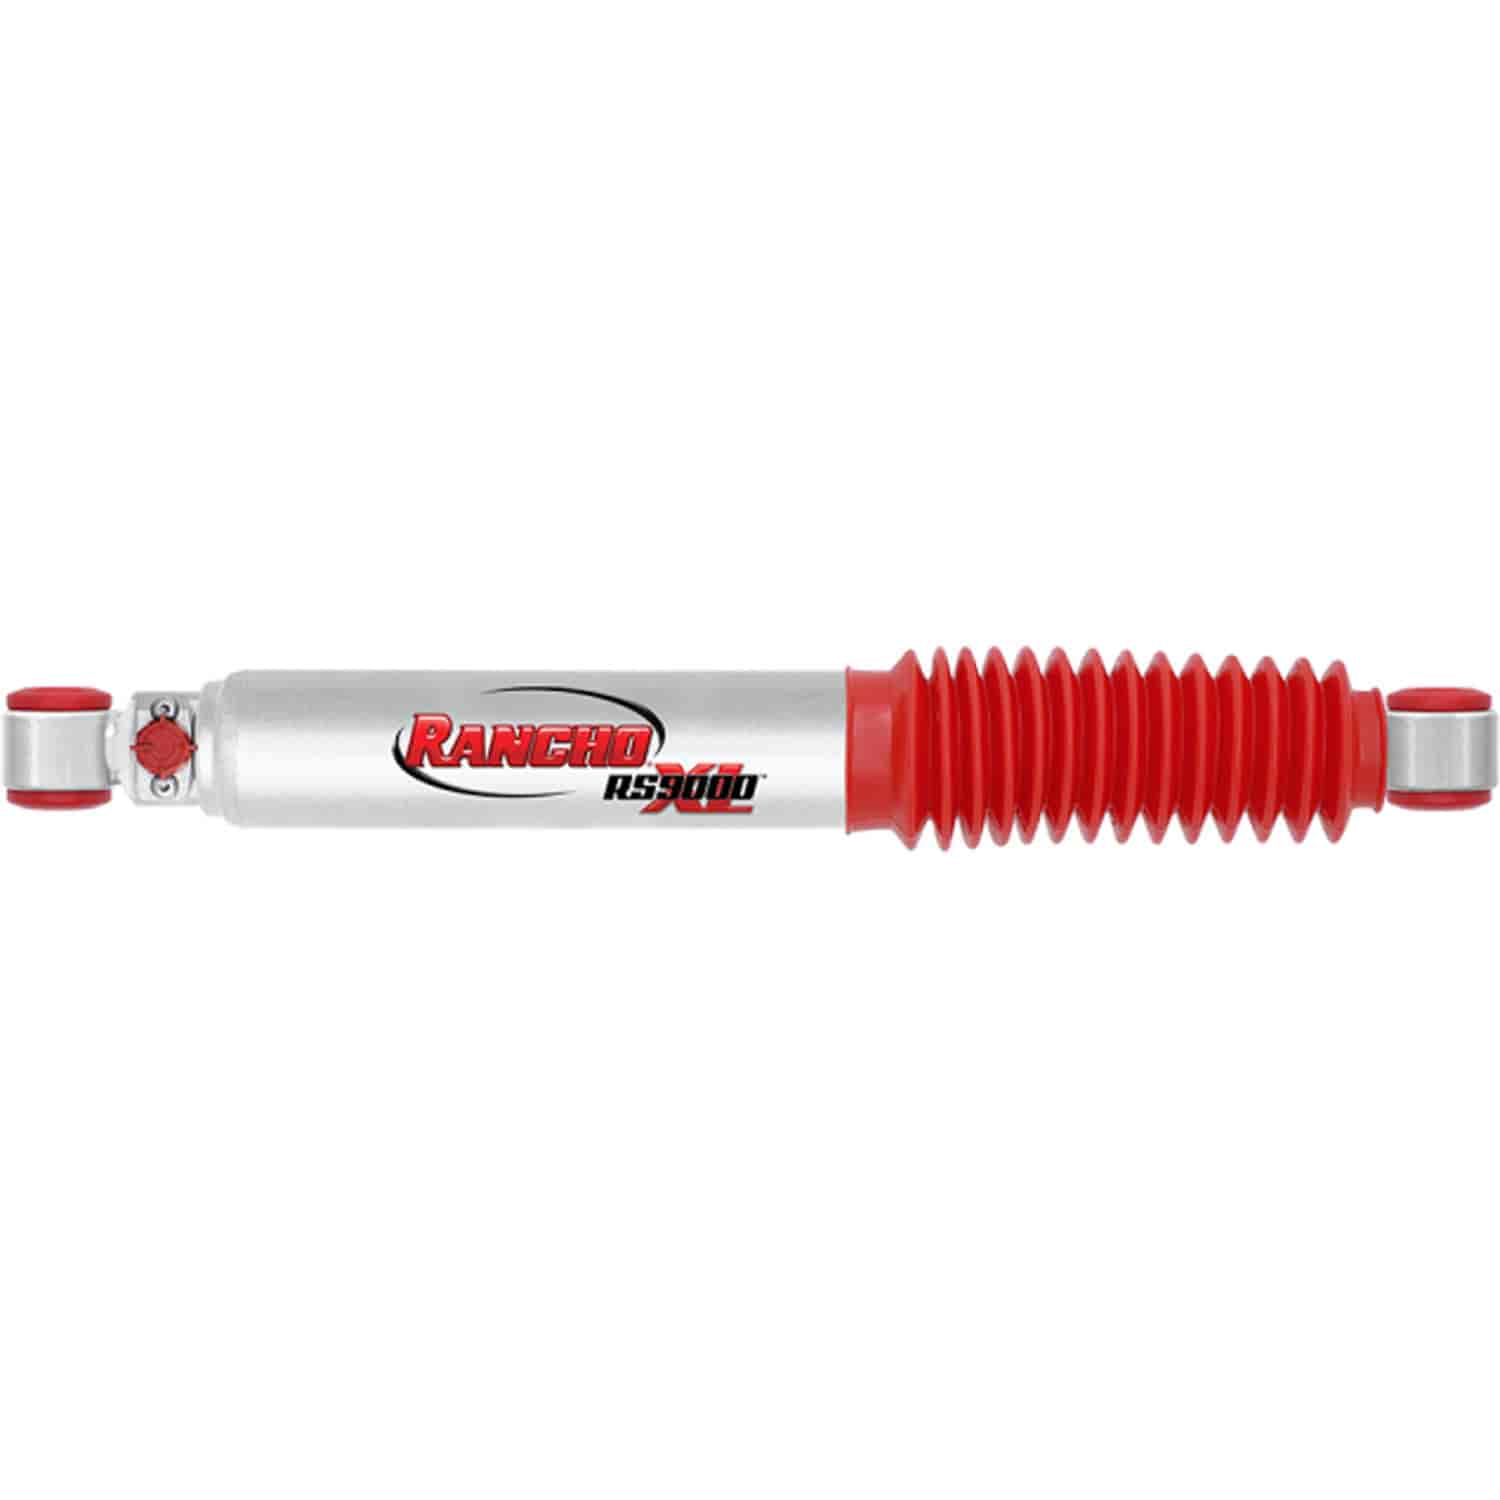 RS9000XL Rear Shock Absorber Fits Toyota 4Runner, Land Cruiser and Hi-Lux Commercial